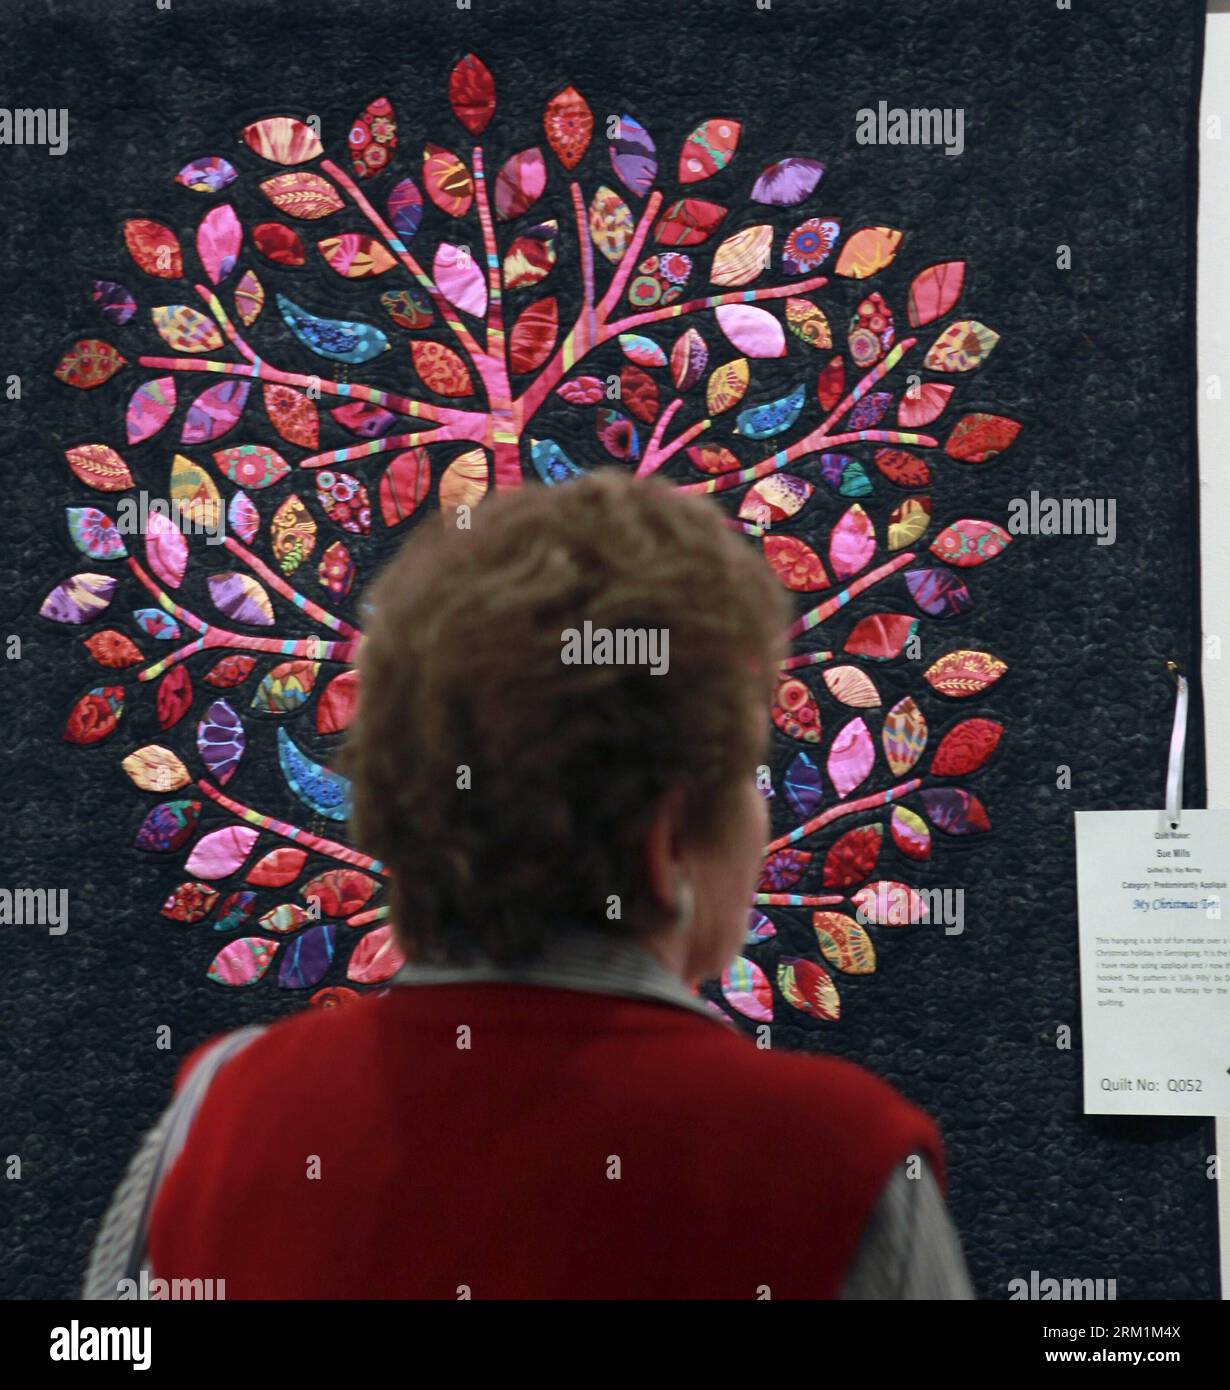 Bildnummer: 59598382  Datum: 03.05.2013  Copyright: imago/Xinhua (130503) -- SYDNEY, May 3, 2013 (Xinhua) -- A visitor attends the Brush Farm Quilt show in Rhyde out of Sydney, Australia, on May 3, 2013. The quilt show is under the sponsorship of the Quilters Guild of the New South Wales state of Australia. Two exquisite quilts will be auctioned off to raise funds for the Special Olympics. (Xinhua/Jin Linpeng) (djj) AUSTRALIA-SYDNEY-QUILT SHOW PUBLICATIONxNOTxINxCHN xcb x0x 2013 quadrat      59598382 Date 03 05 2013 Copyright Imago XINHUA  Sydney May 3 2013 XINHUA a Visitor Attends The Brush F Stock Photo